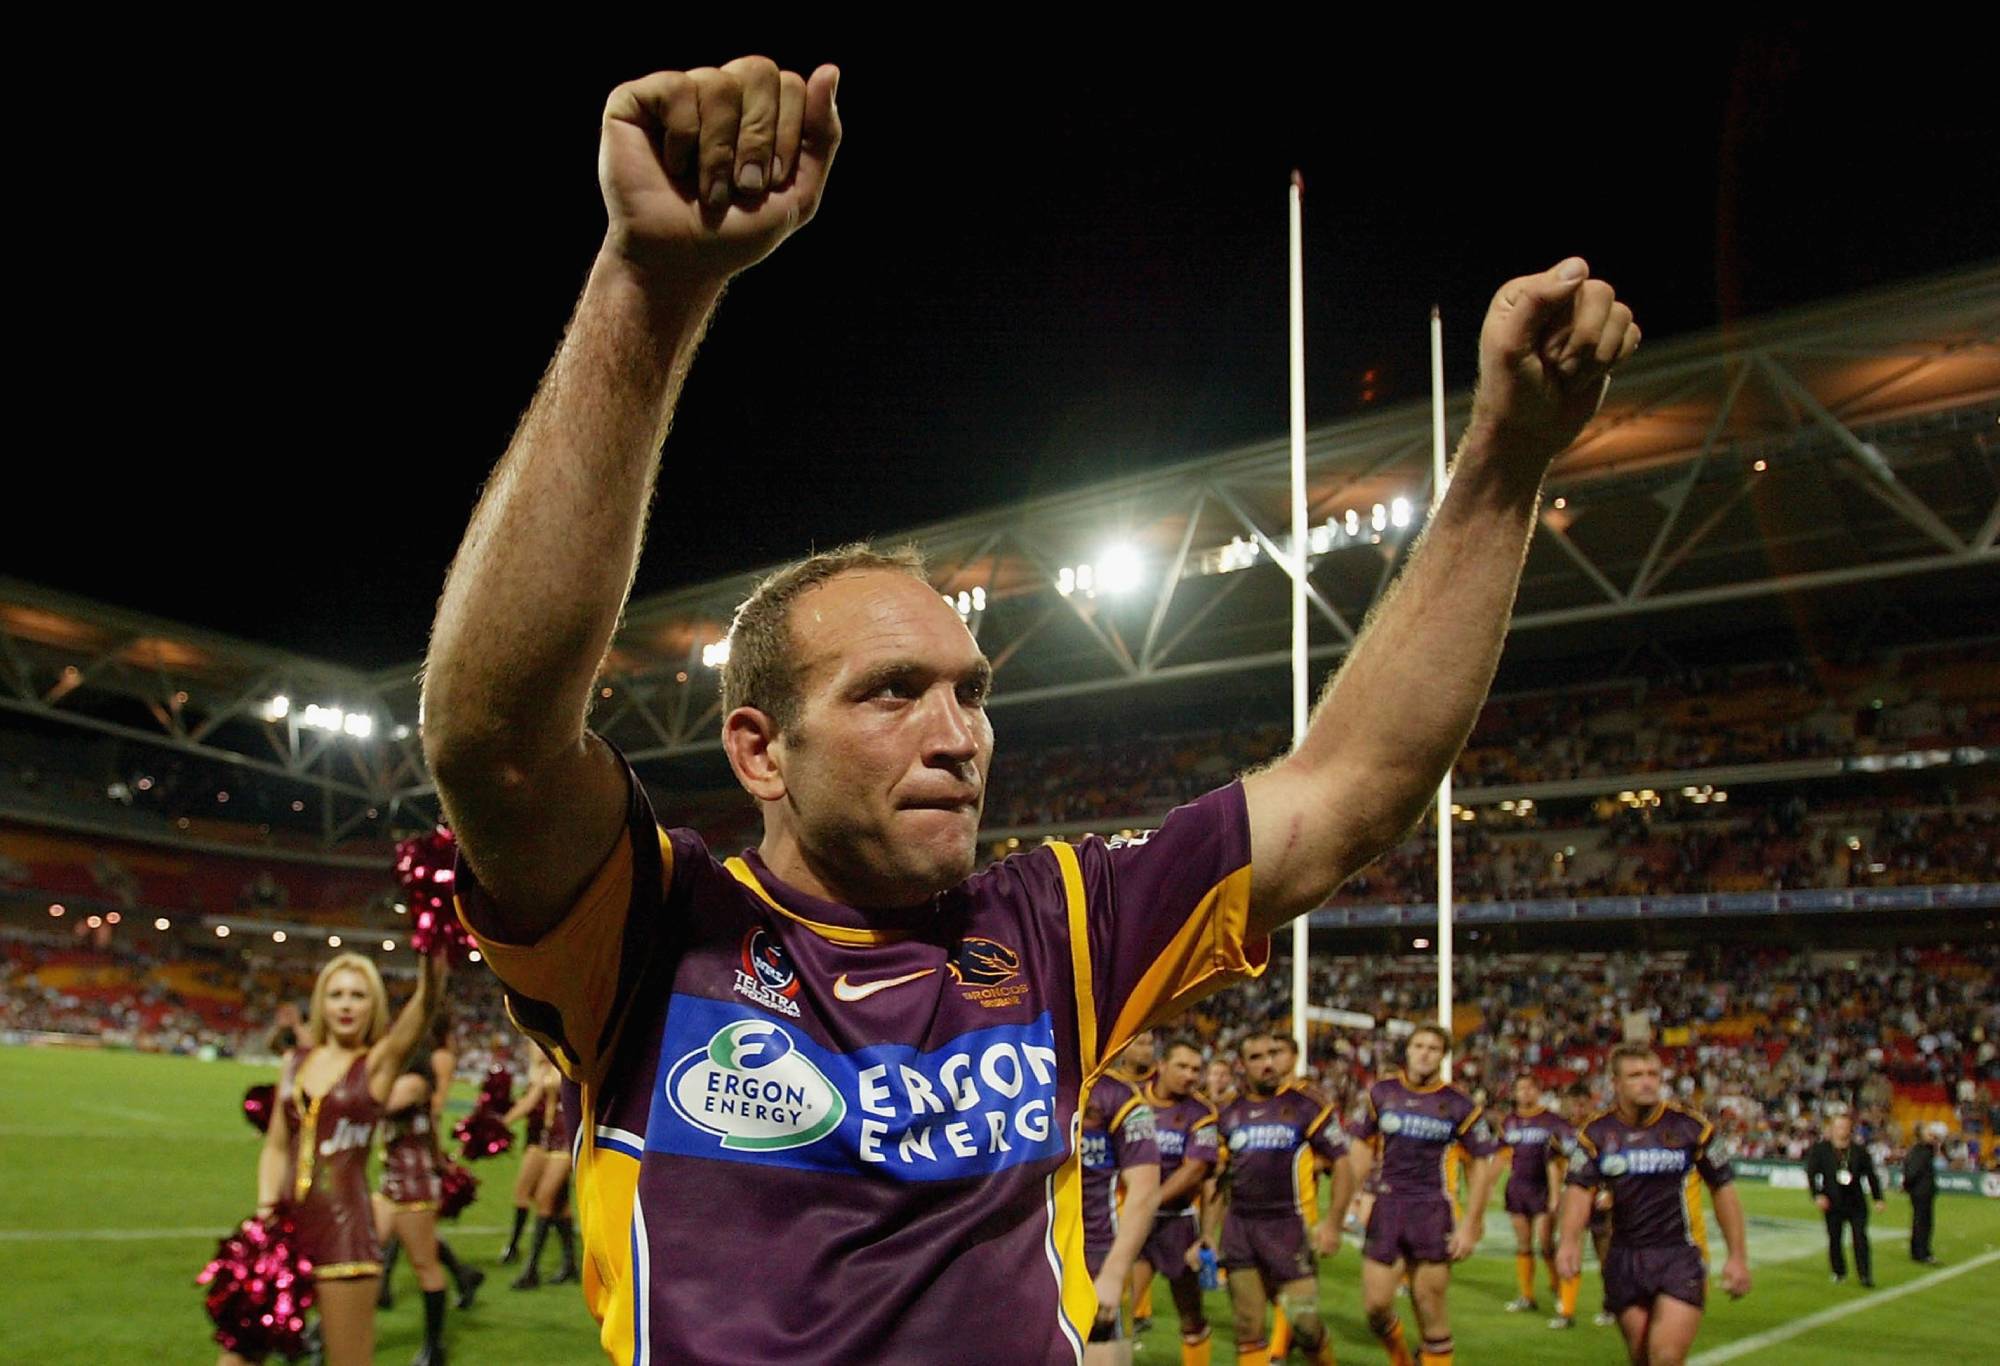 BRISBANE, AUSTRALIA - SEPTEMBER 11: Gorden Tallis of the Broncos waves to the crowd after his final match during the NRL match between the Brisbane Broncos and Melbourne Storm at Suncorp Stadium, on September 11, 2004 in Brisbane, Australia. (Photo by Jonathan Wood/Getty Images)